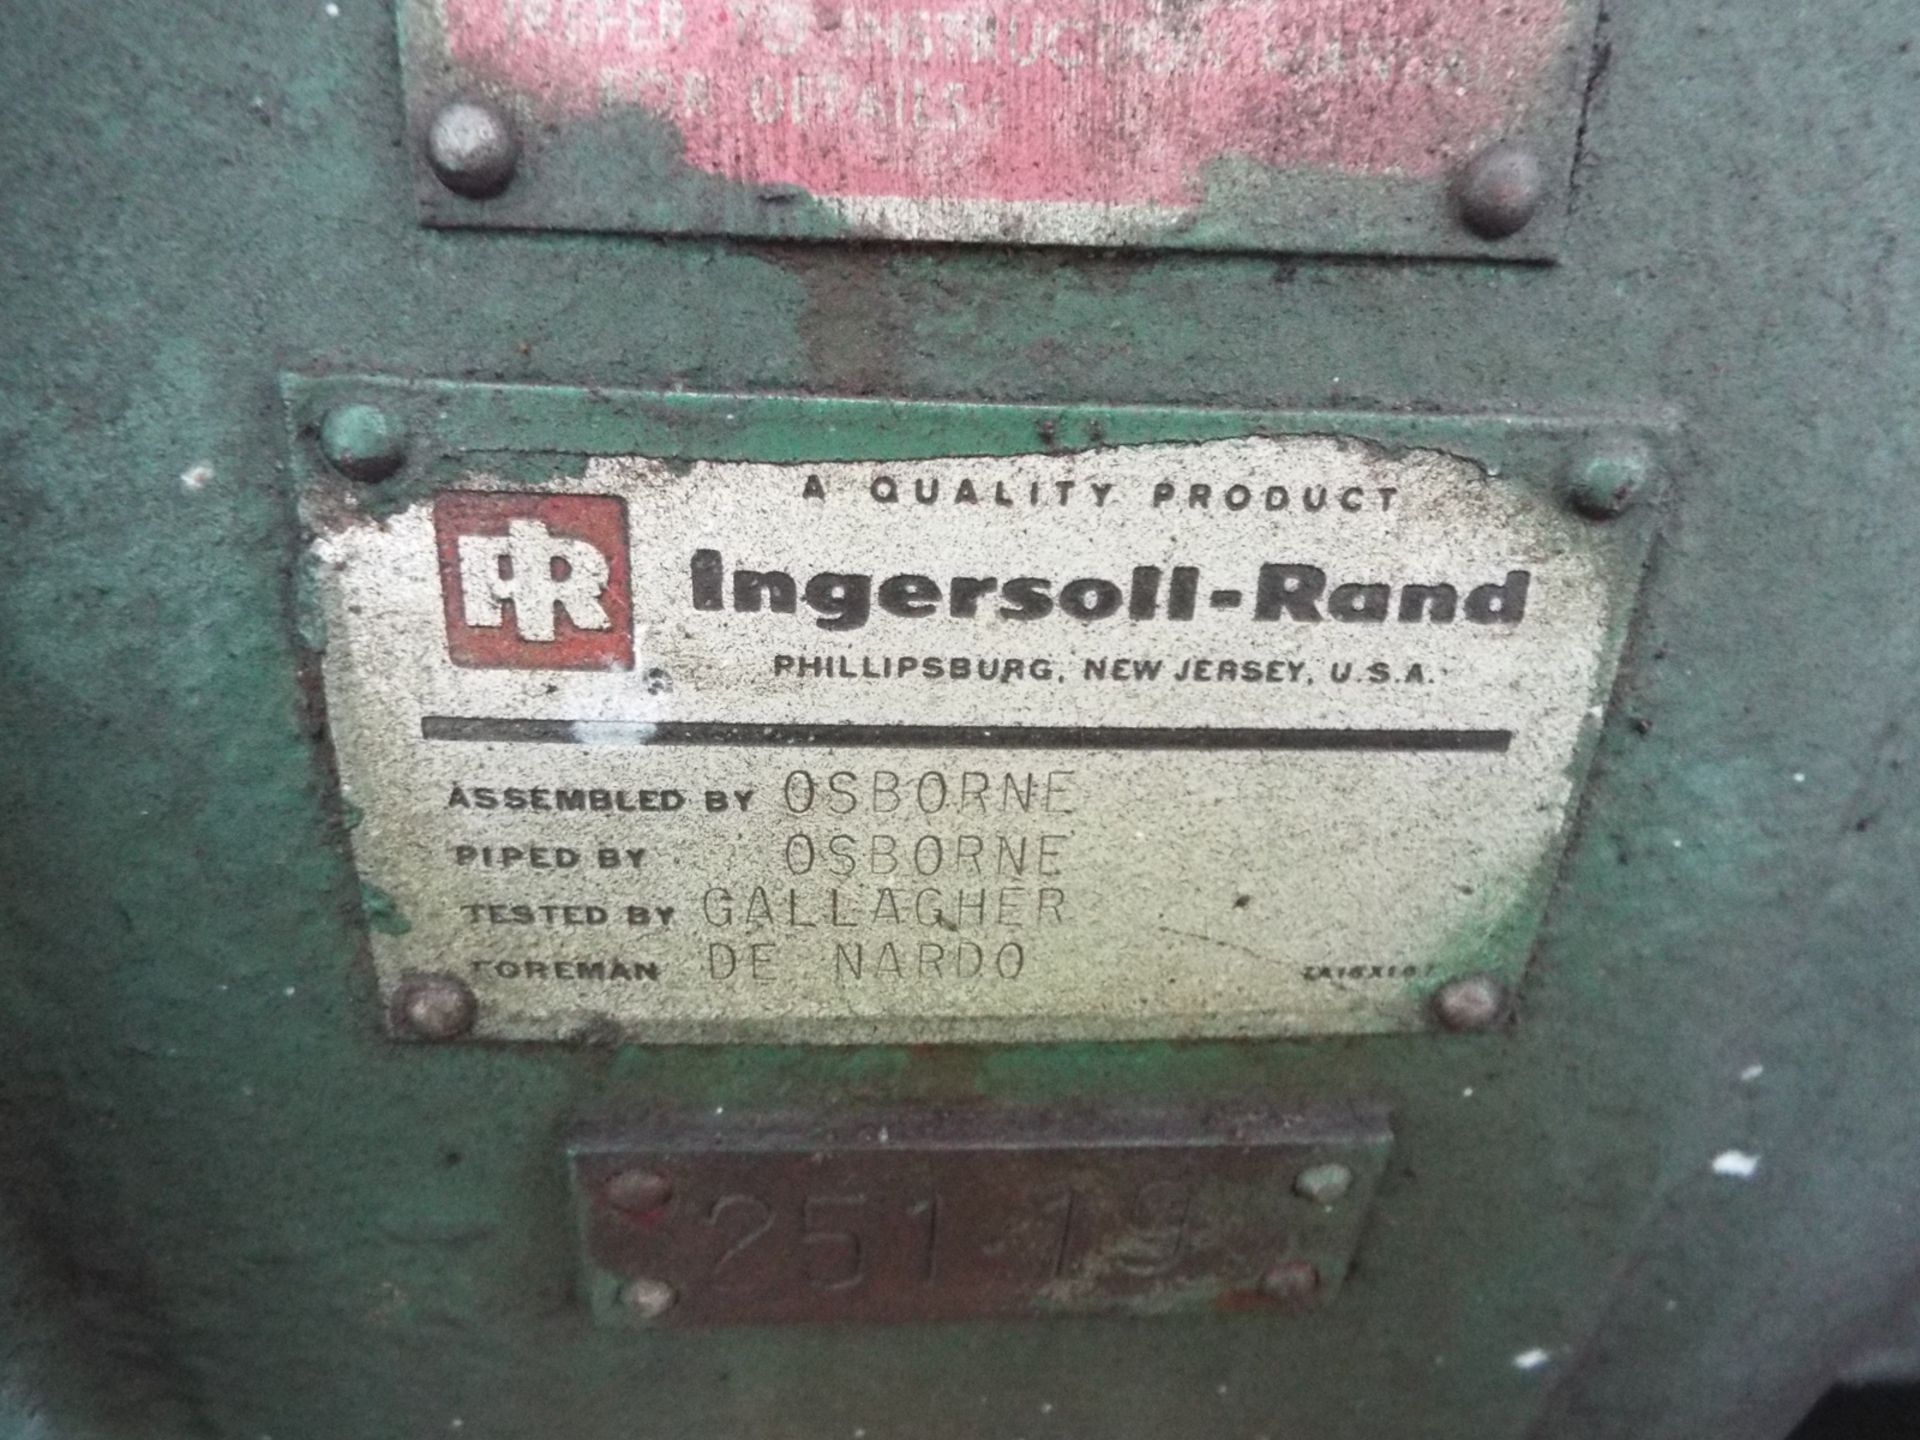 INGERSOLL-RAND 155L38 AXI COMPRESSOR WITH 11.650 CFM, 1770 RPM, 5217 PSI, S/N: 115L20411 - Image 5 of 5